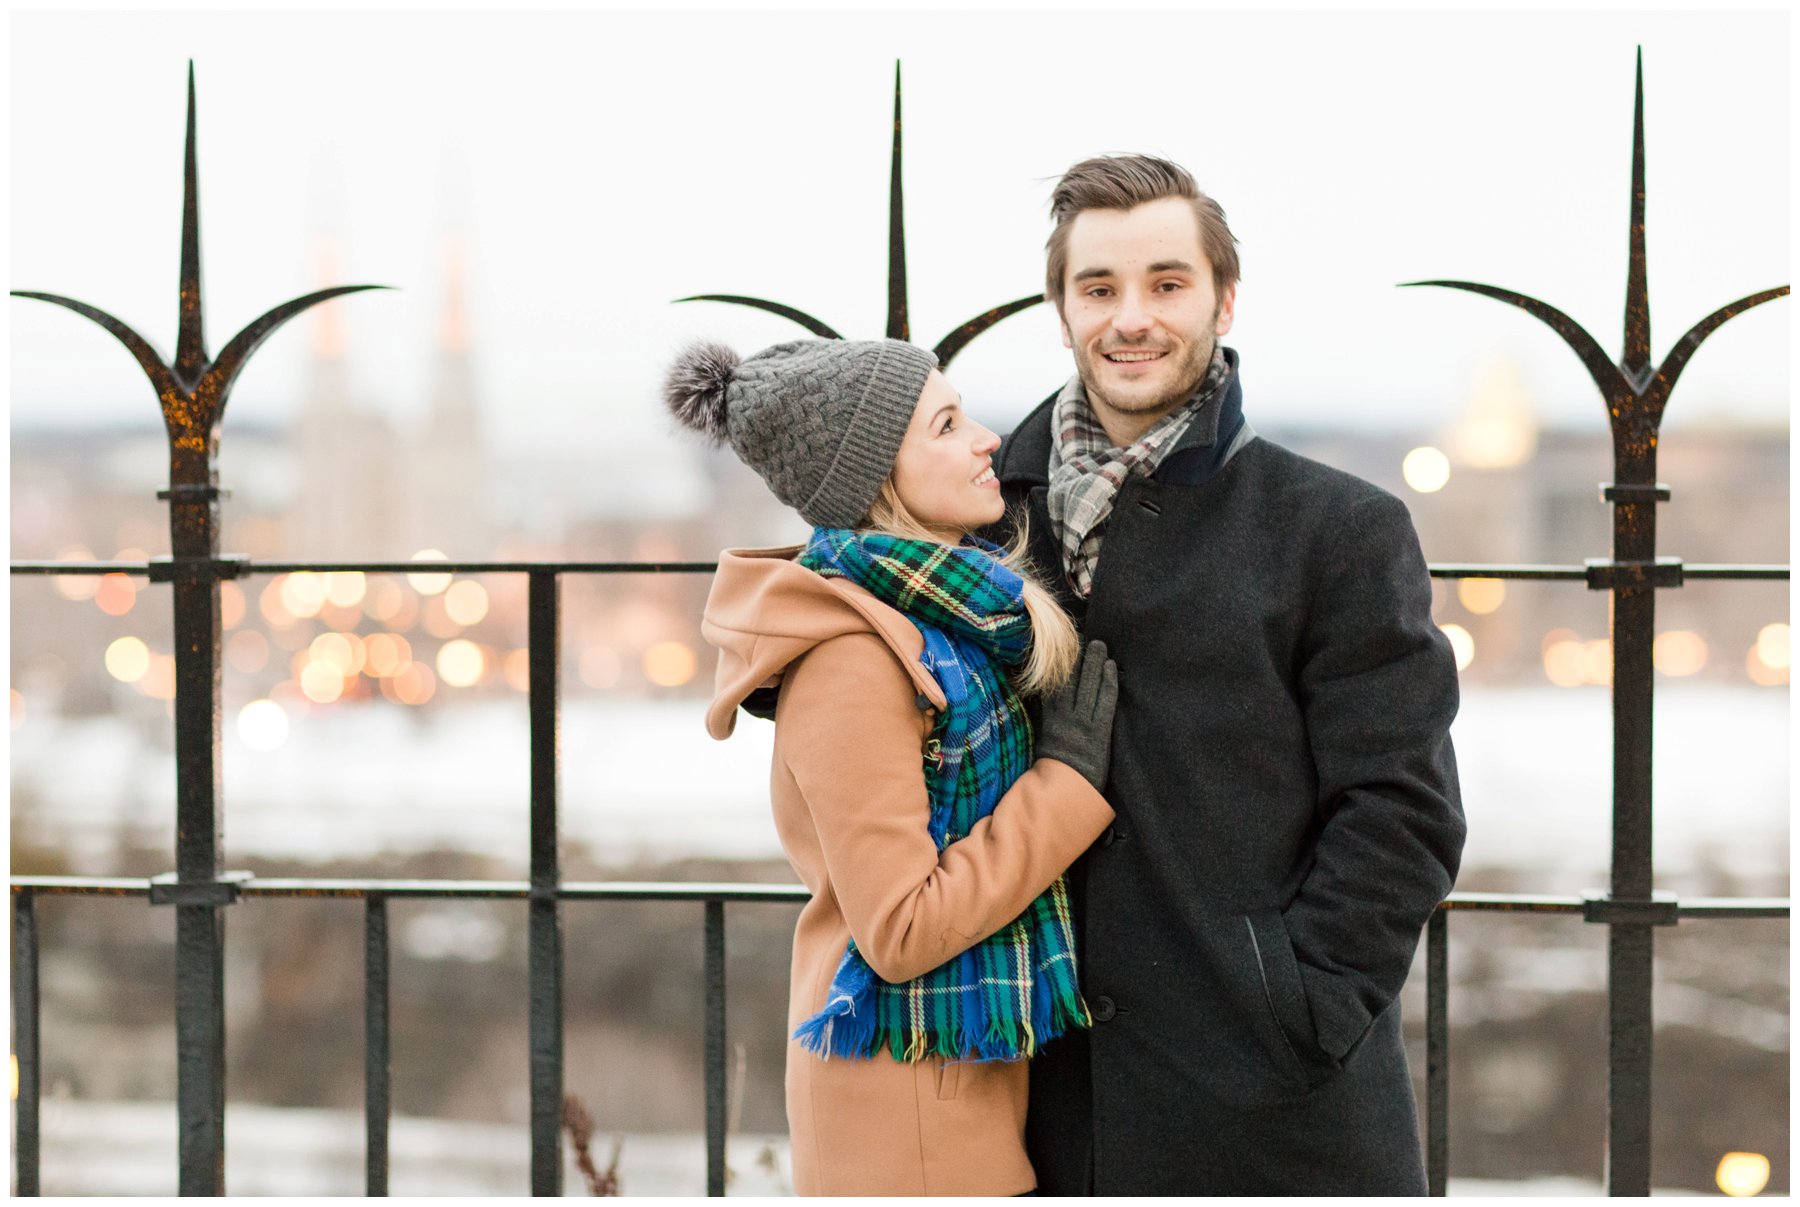 Downtown Ottawa winter engagement session